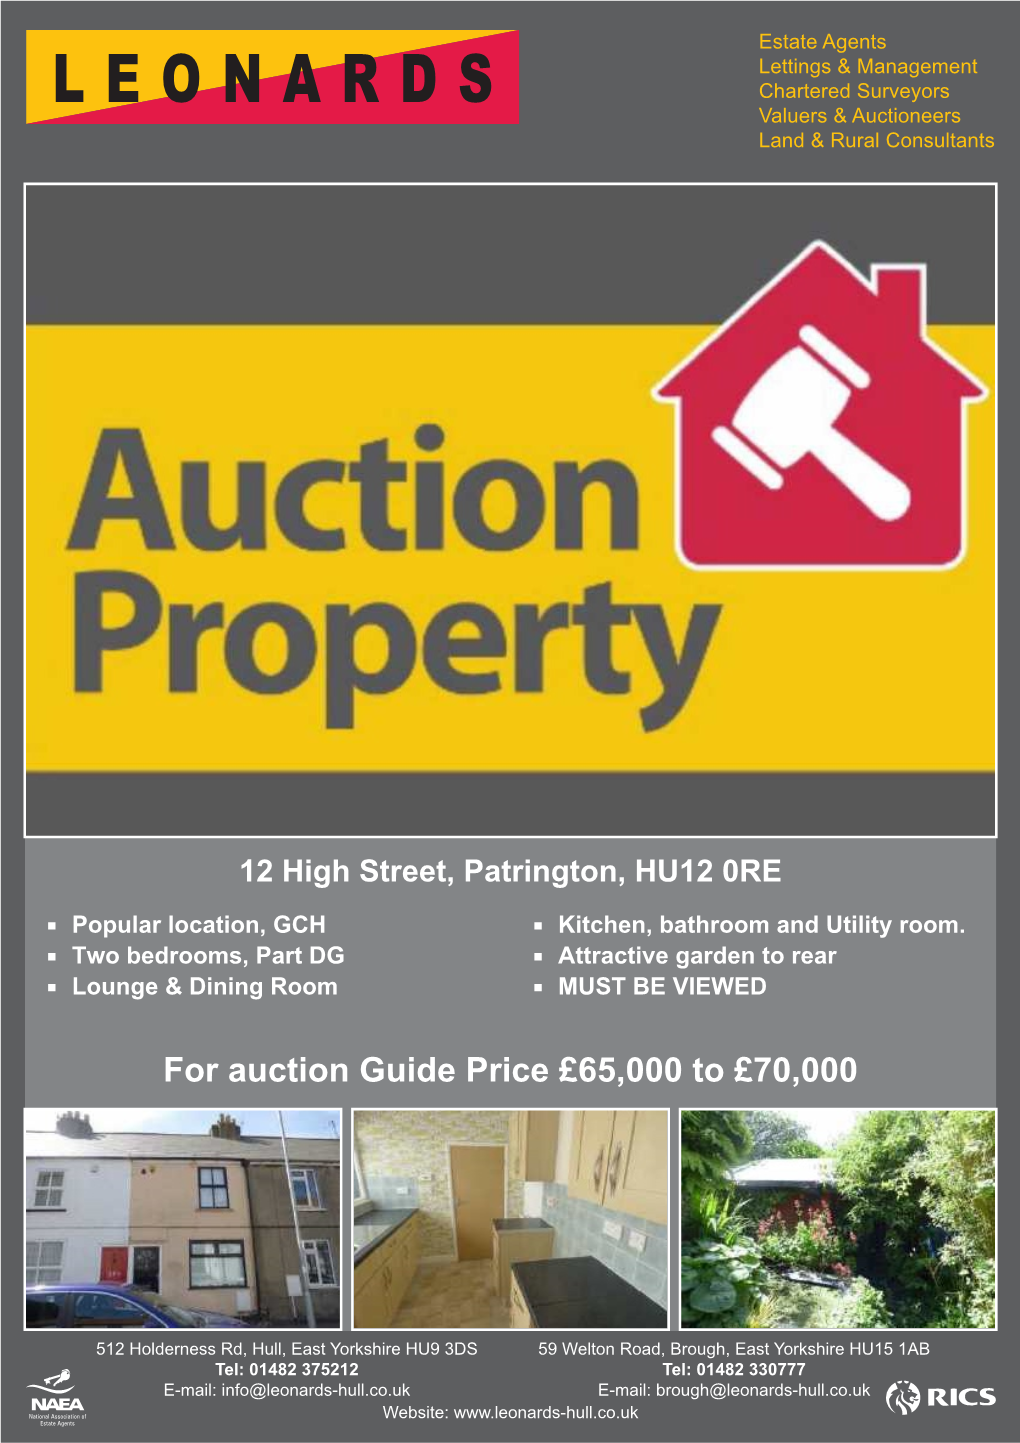 For Auction Guide Price £65,000 to £70,000